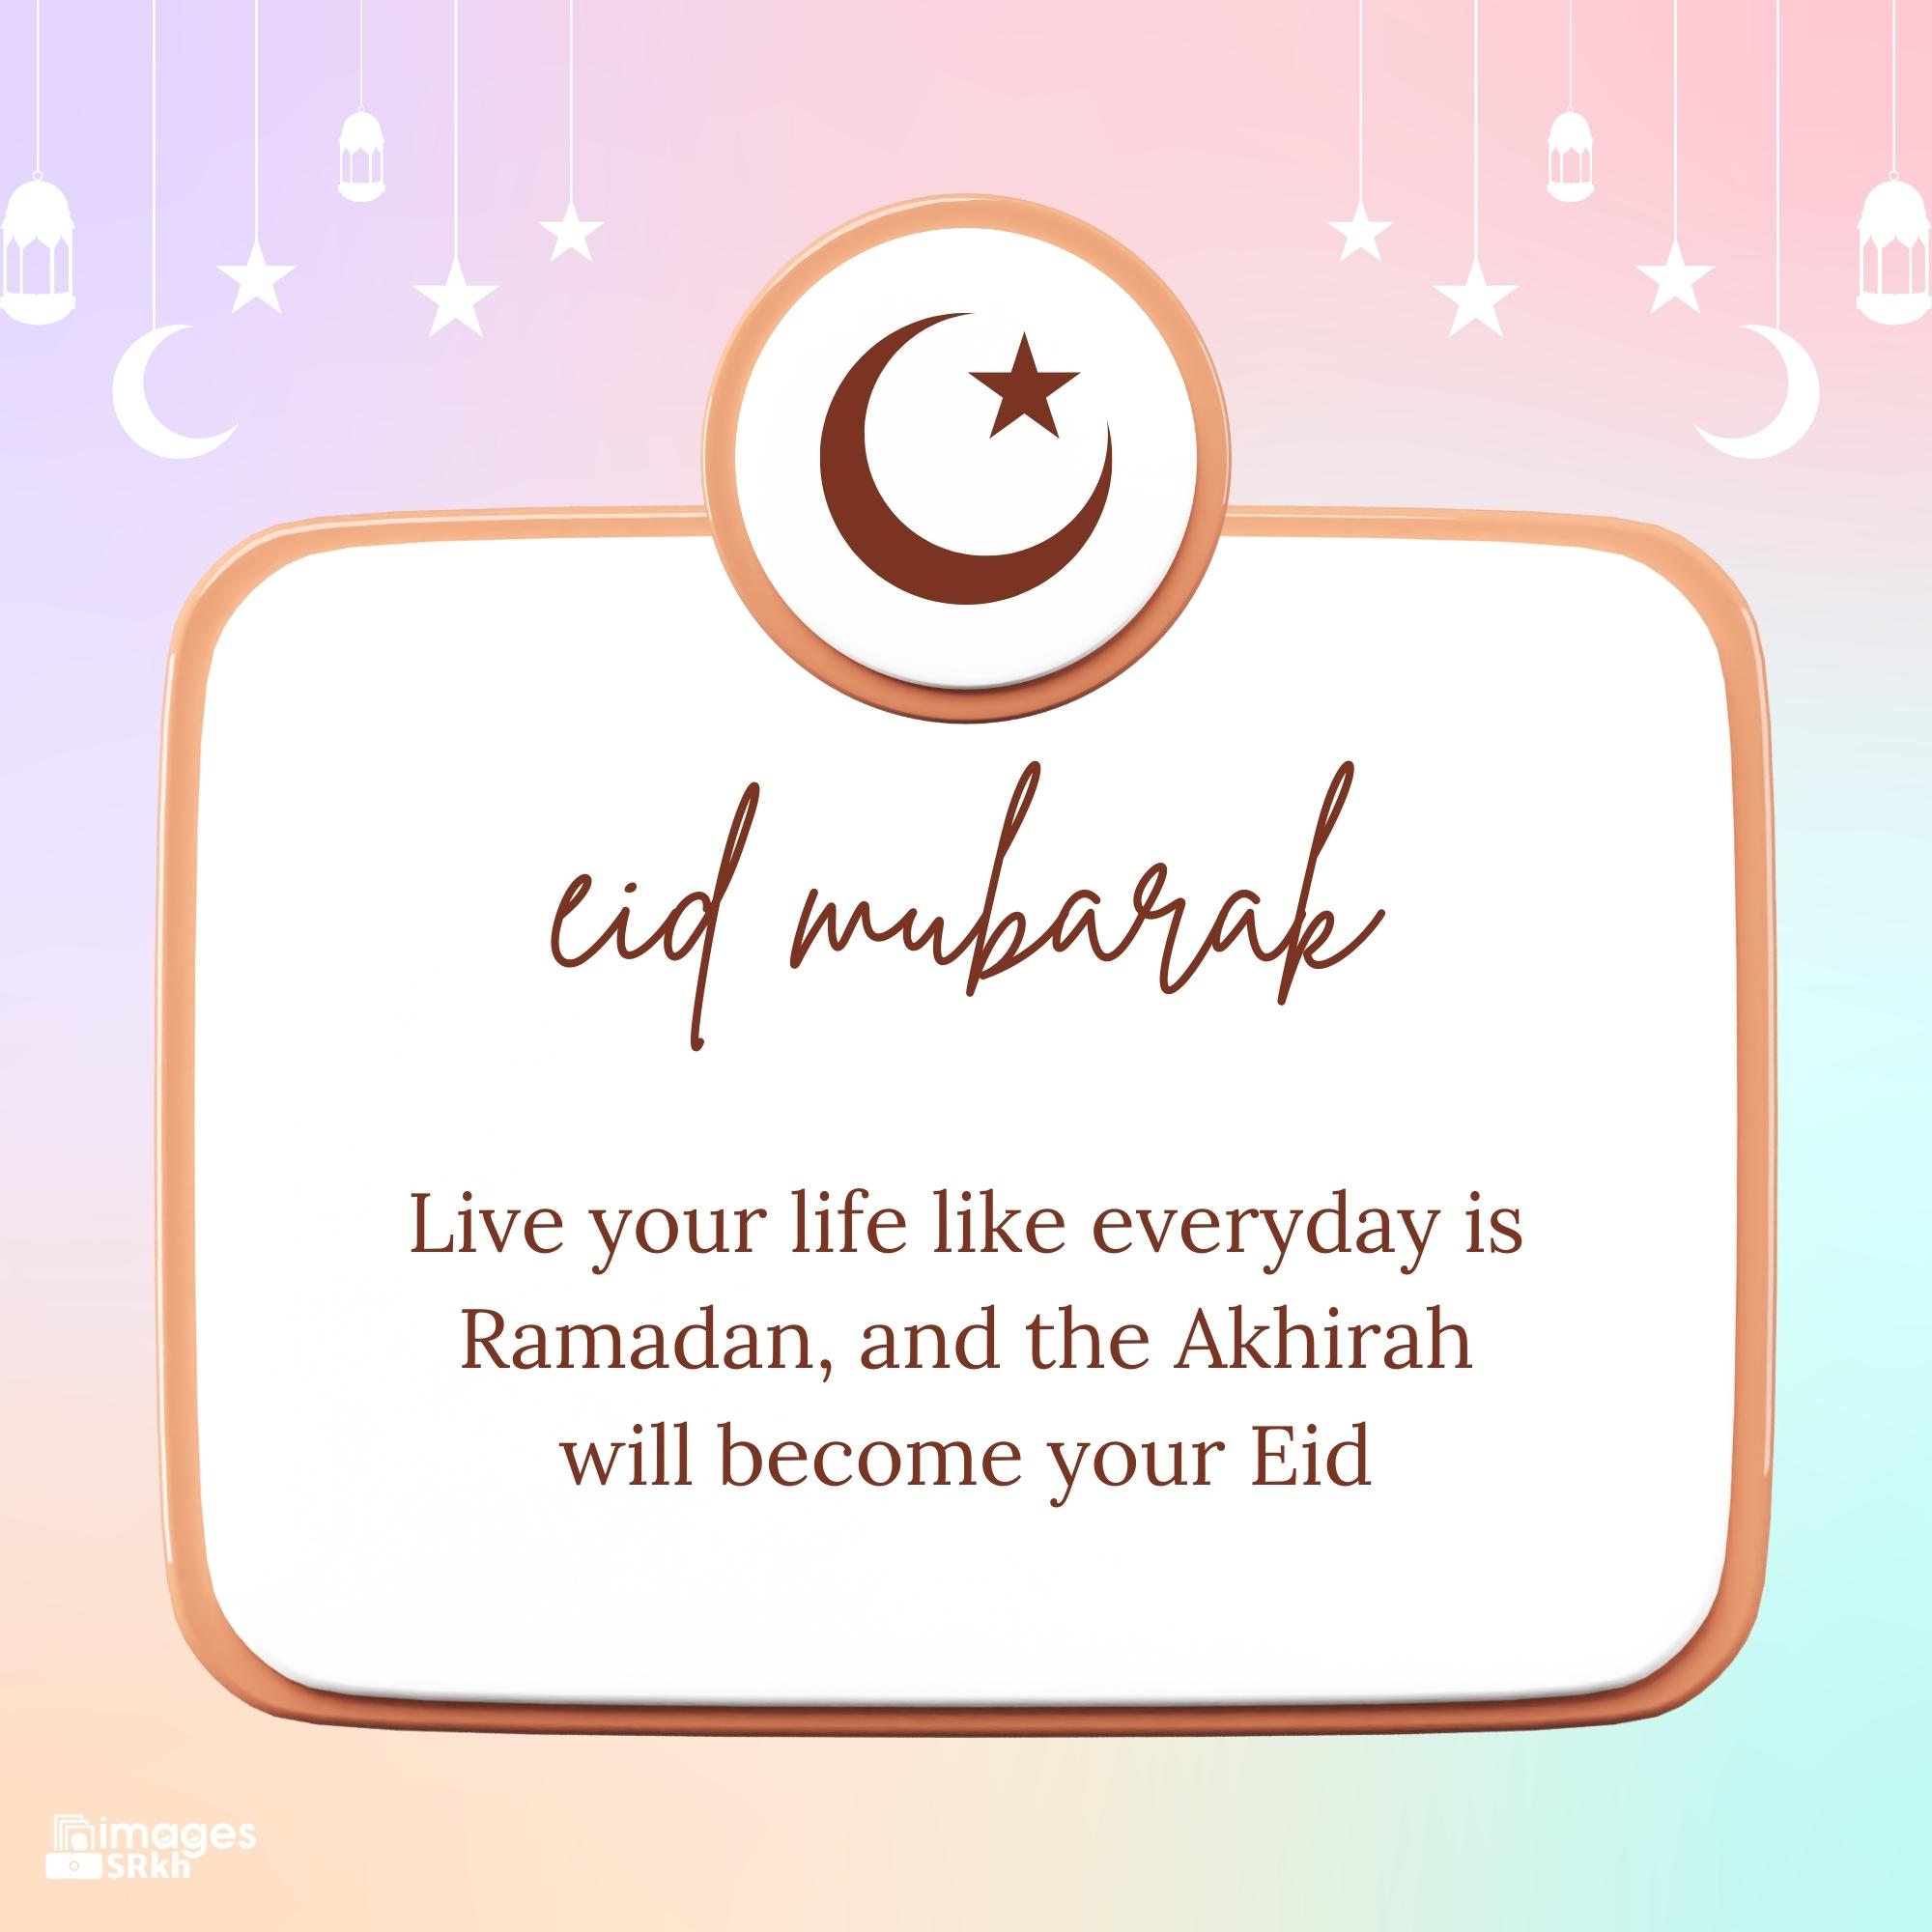 Eid Mubarak Quotes (3) | Download free in Hd Quality | imagesSRkh